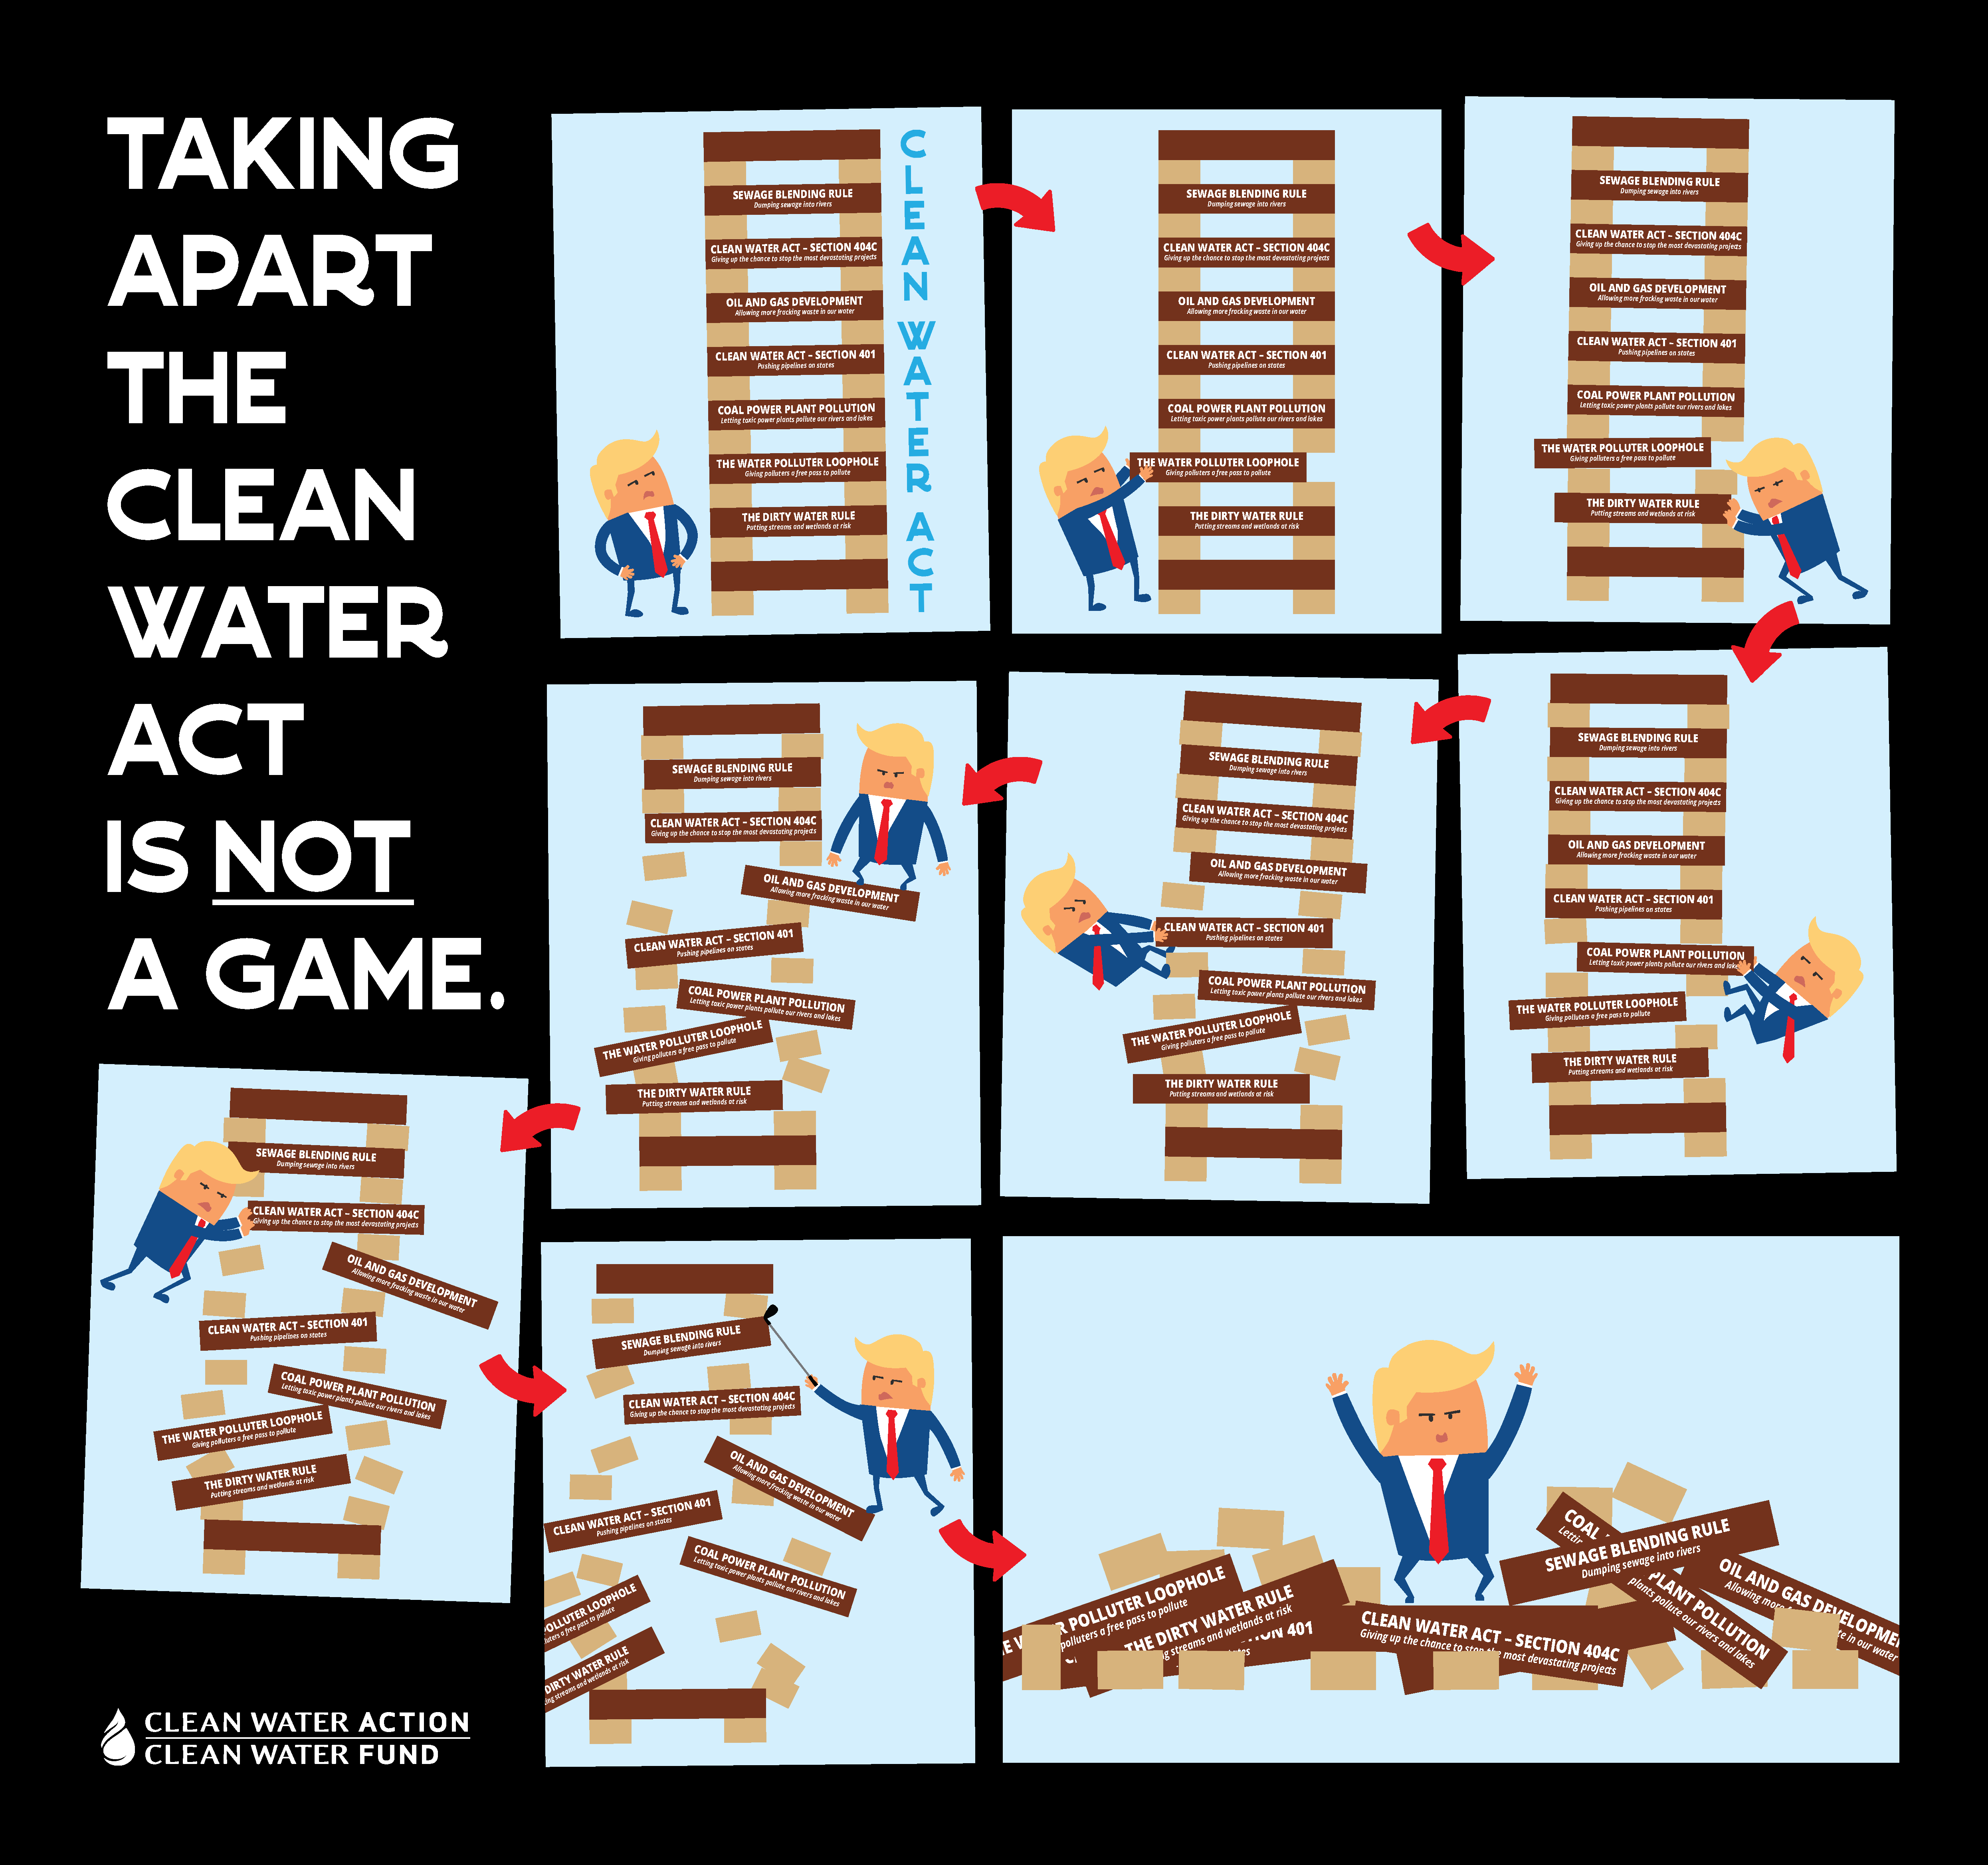 Attacking the Clean Water Act is not a game